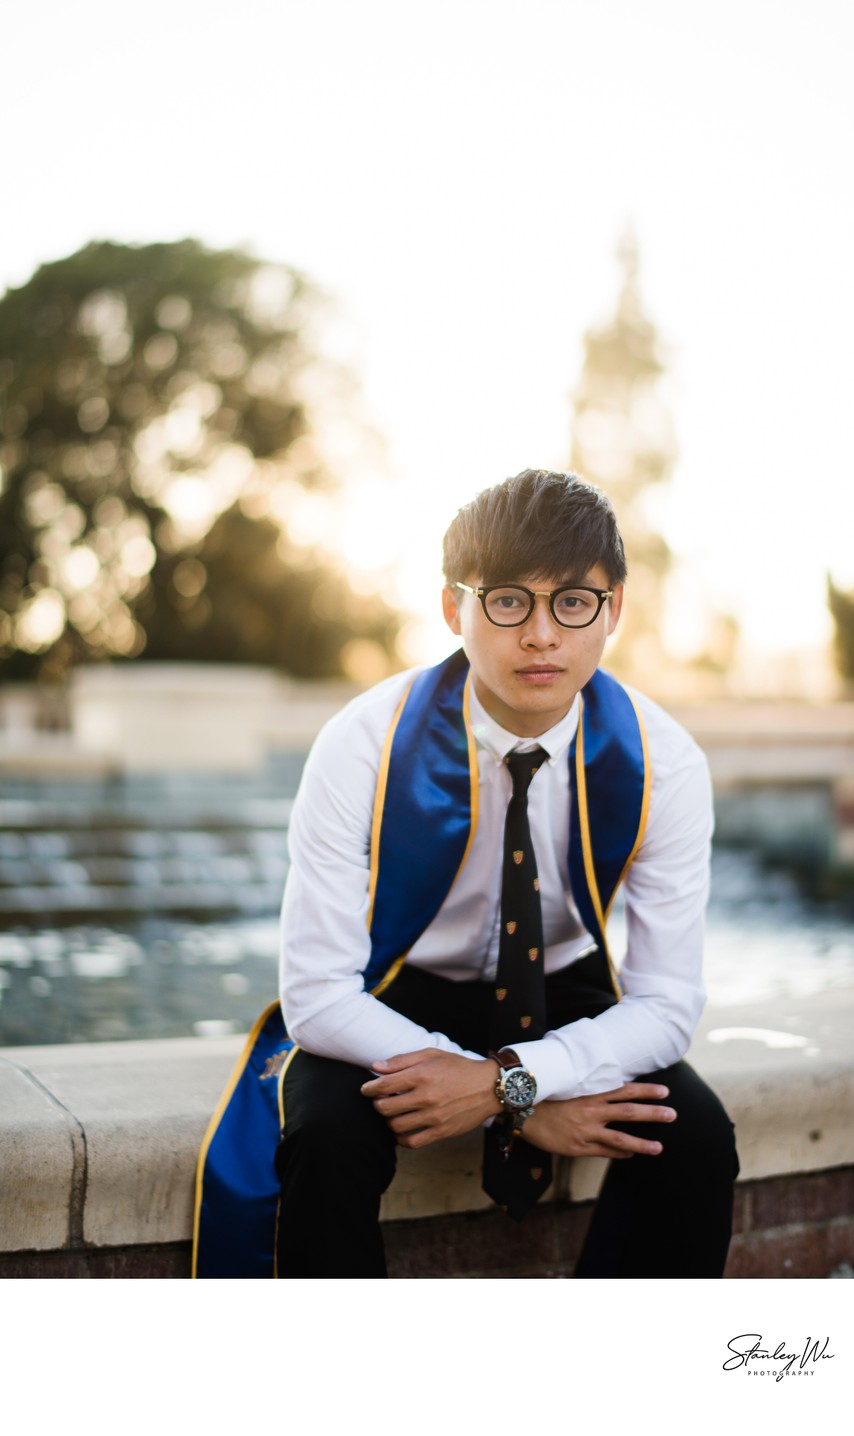 Fashionable Glasses, Watch & Tie for Grad Photos